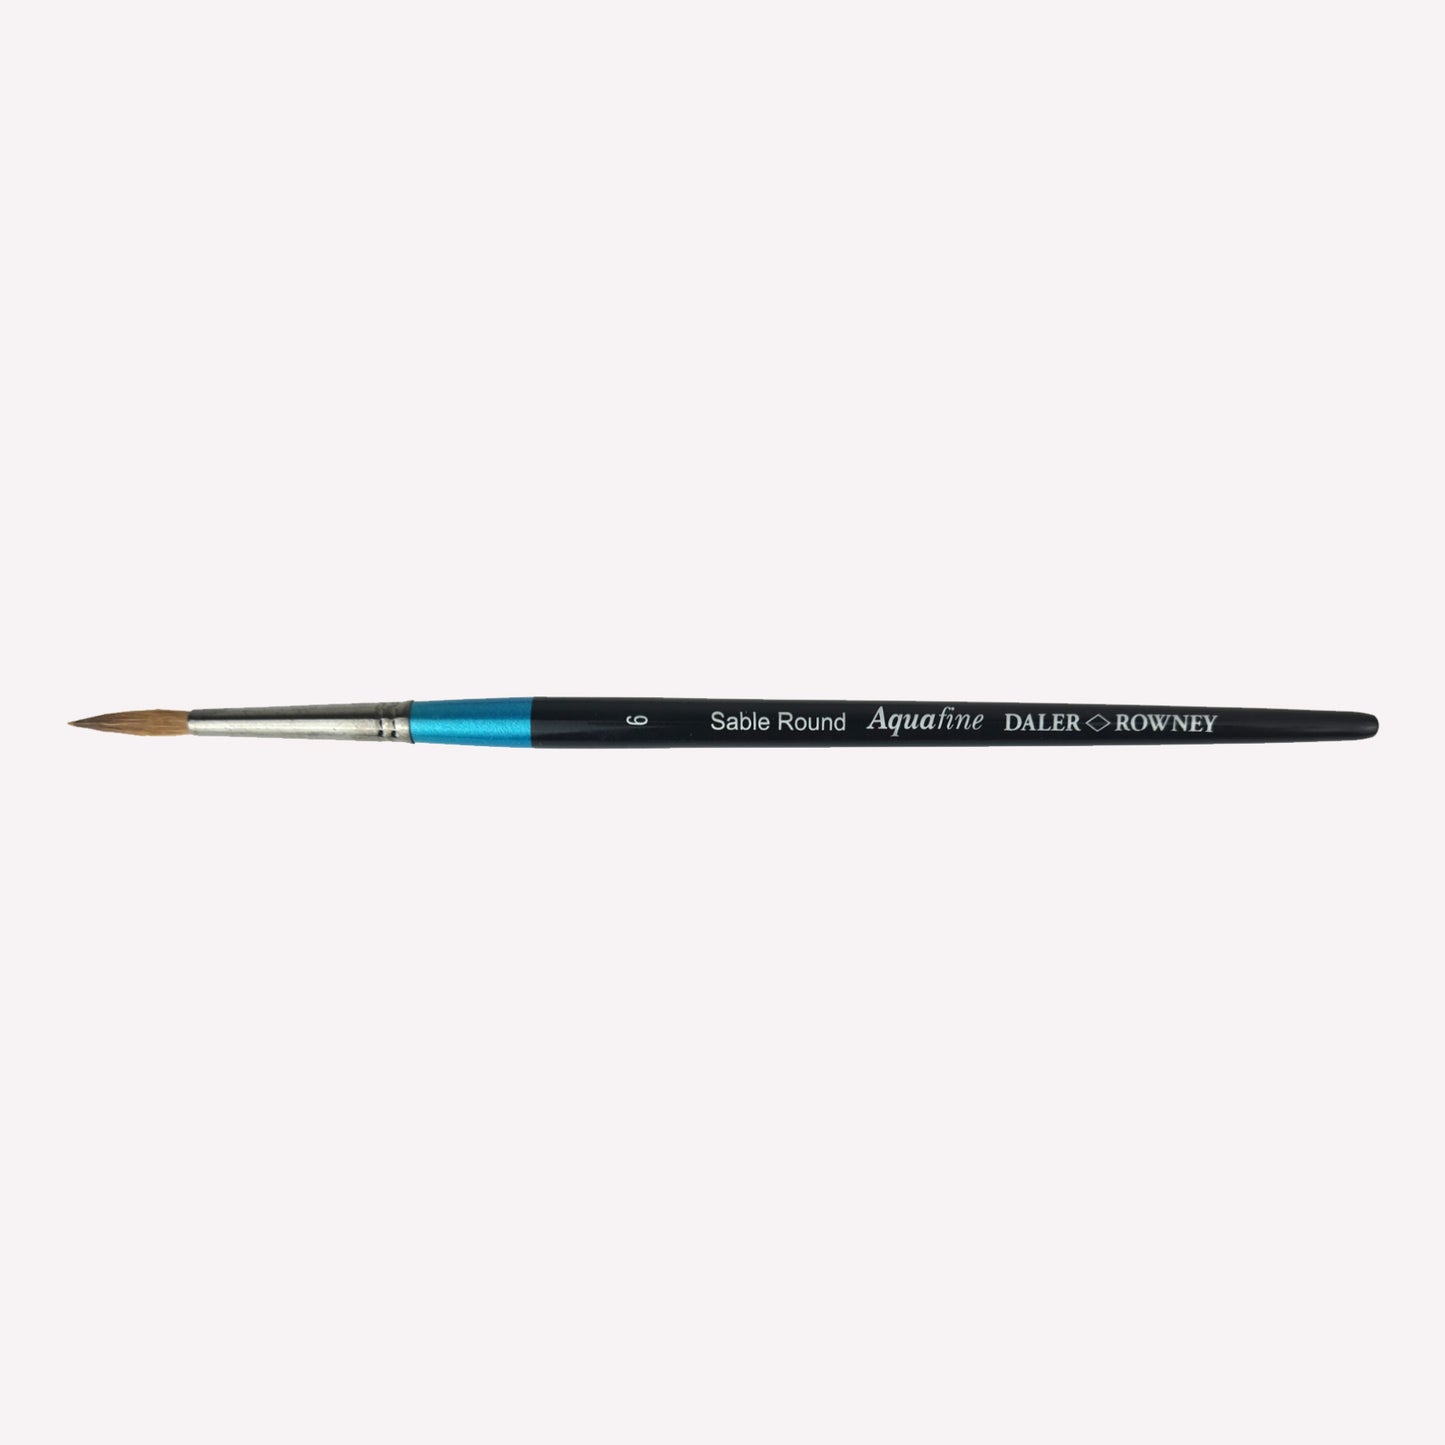 Daler Rowney Aquafine Sable round paintbrush in size 6. The natural filaments come to a fine point, perfect for detailed paintings. Brushes have a classy black handle with blue detailing and a silver ferrule. 